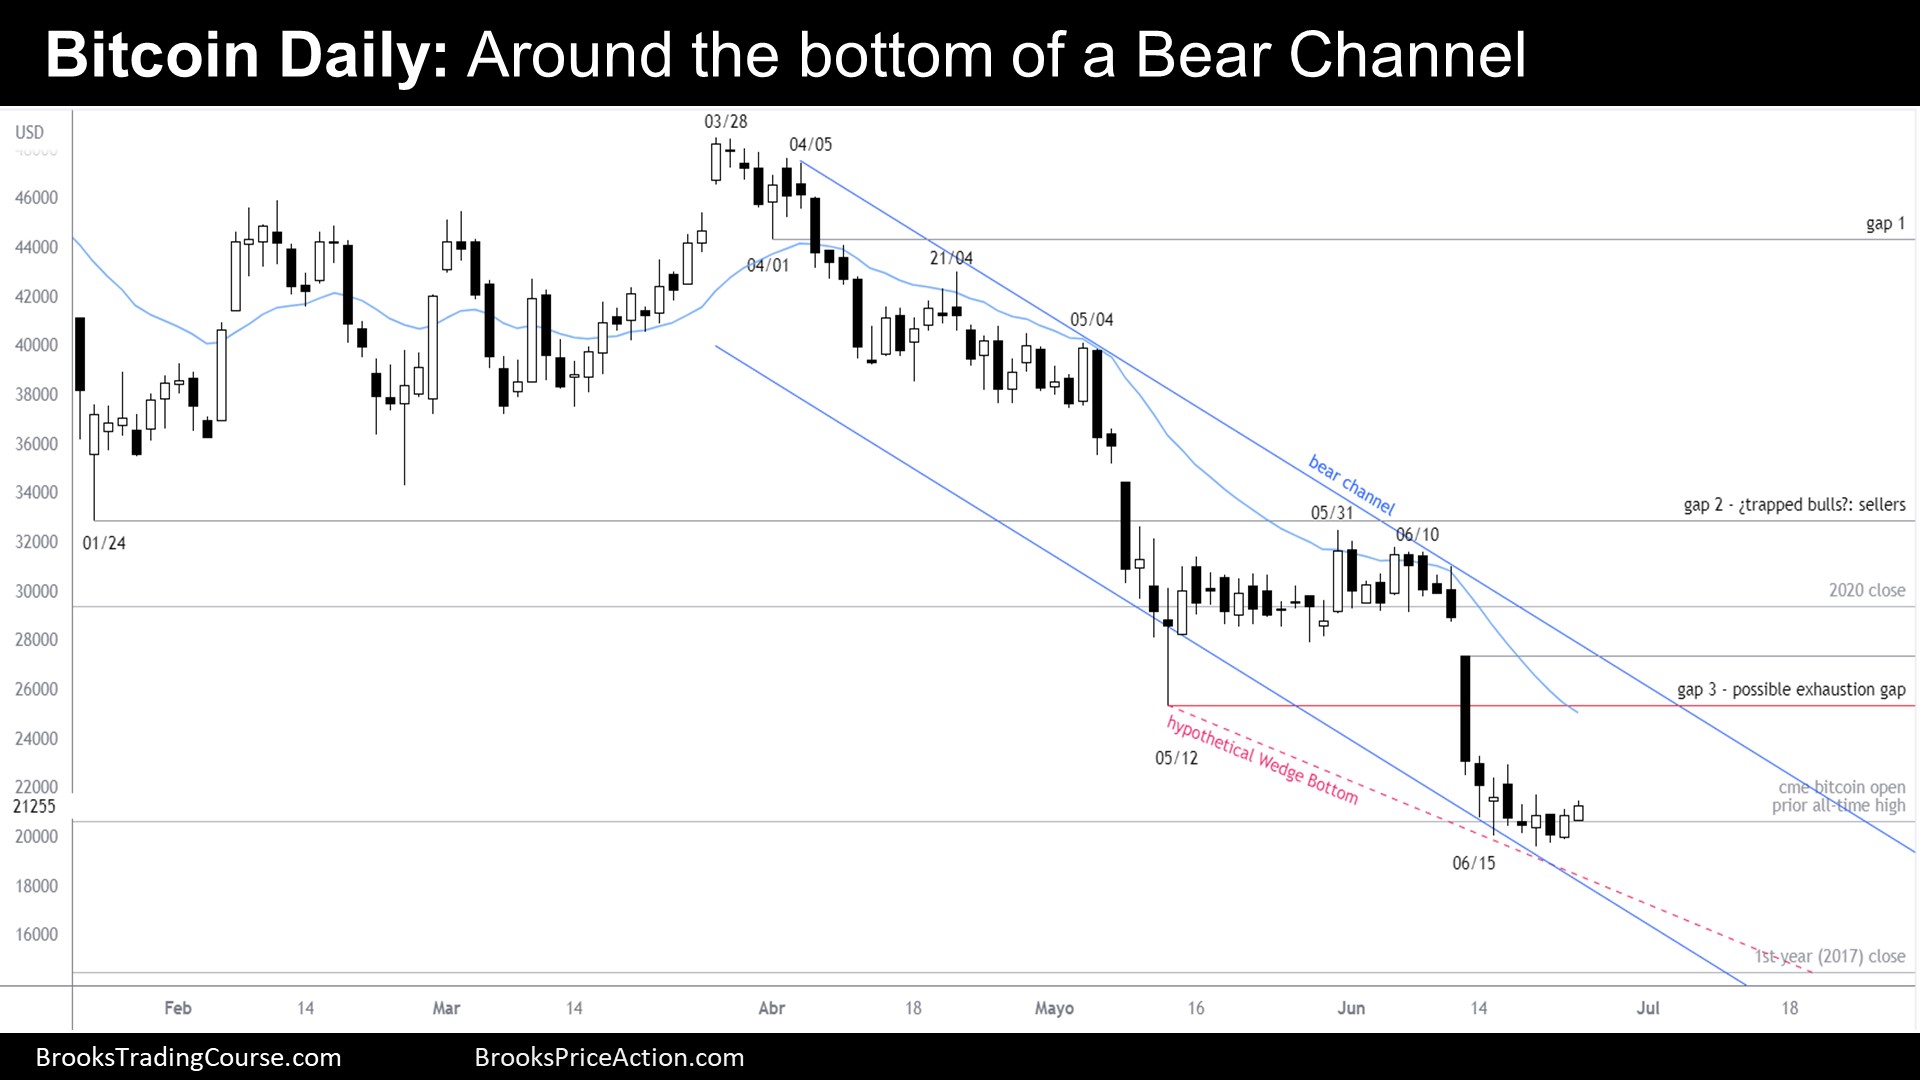 Bitcoin Futures Daily Chart Bottom of a Bear Channel